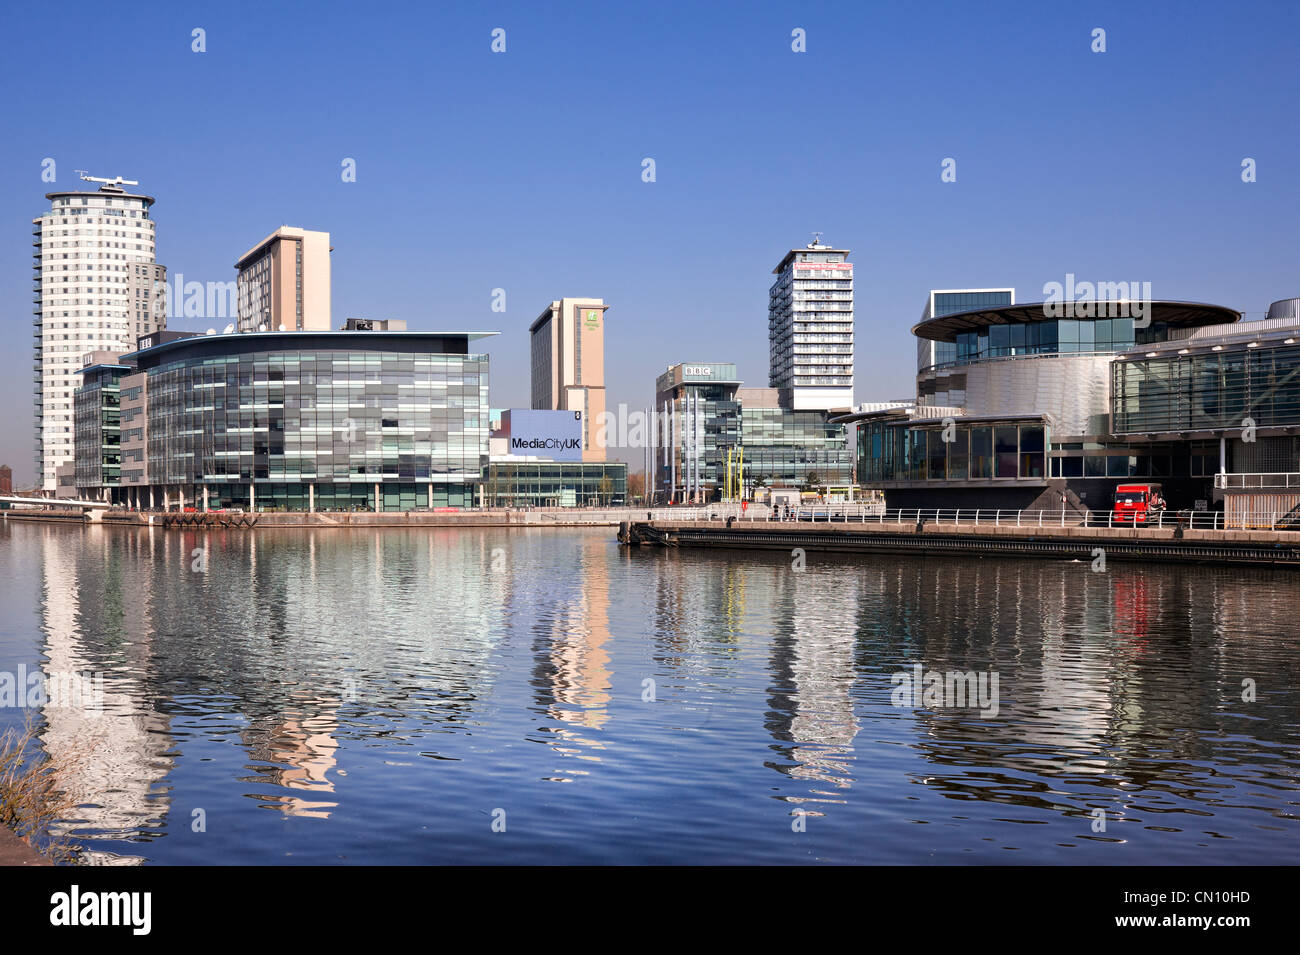 Looking across the Manchester Ship Canal to  Media City UK to the left and The Quays Theatre at The Lowry to the right. Stock Photo